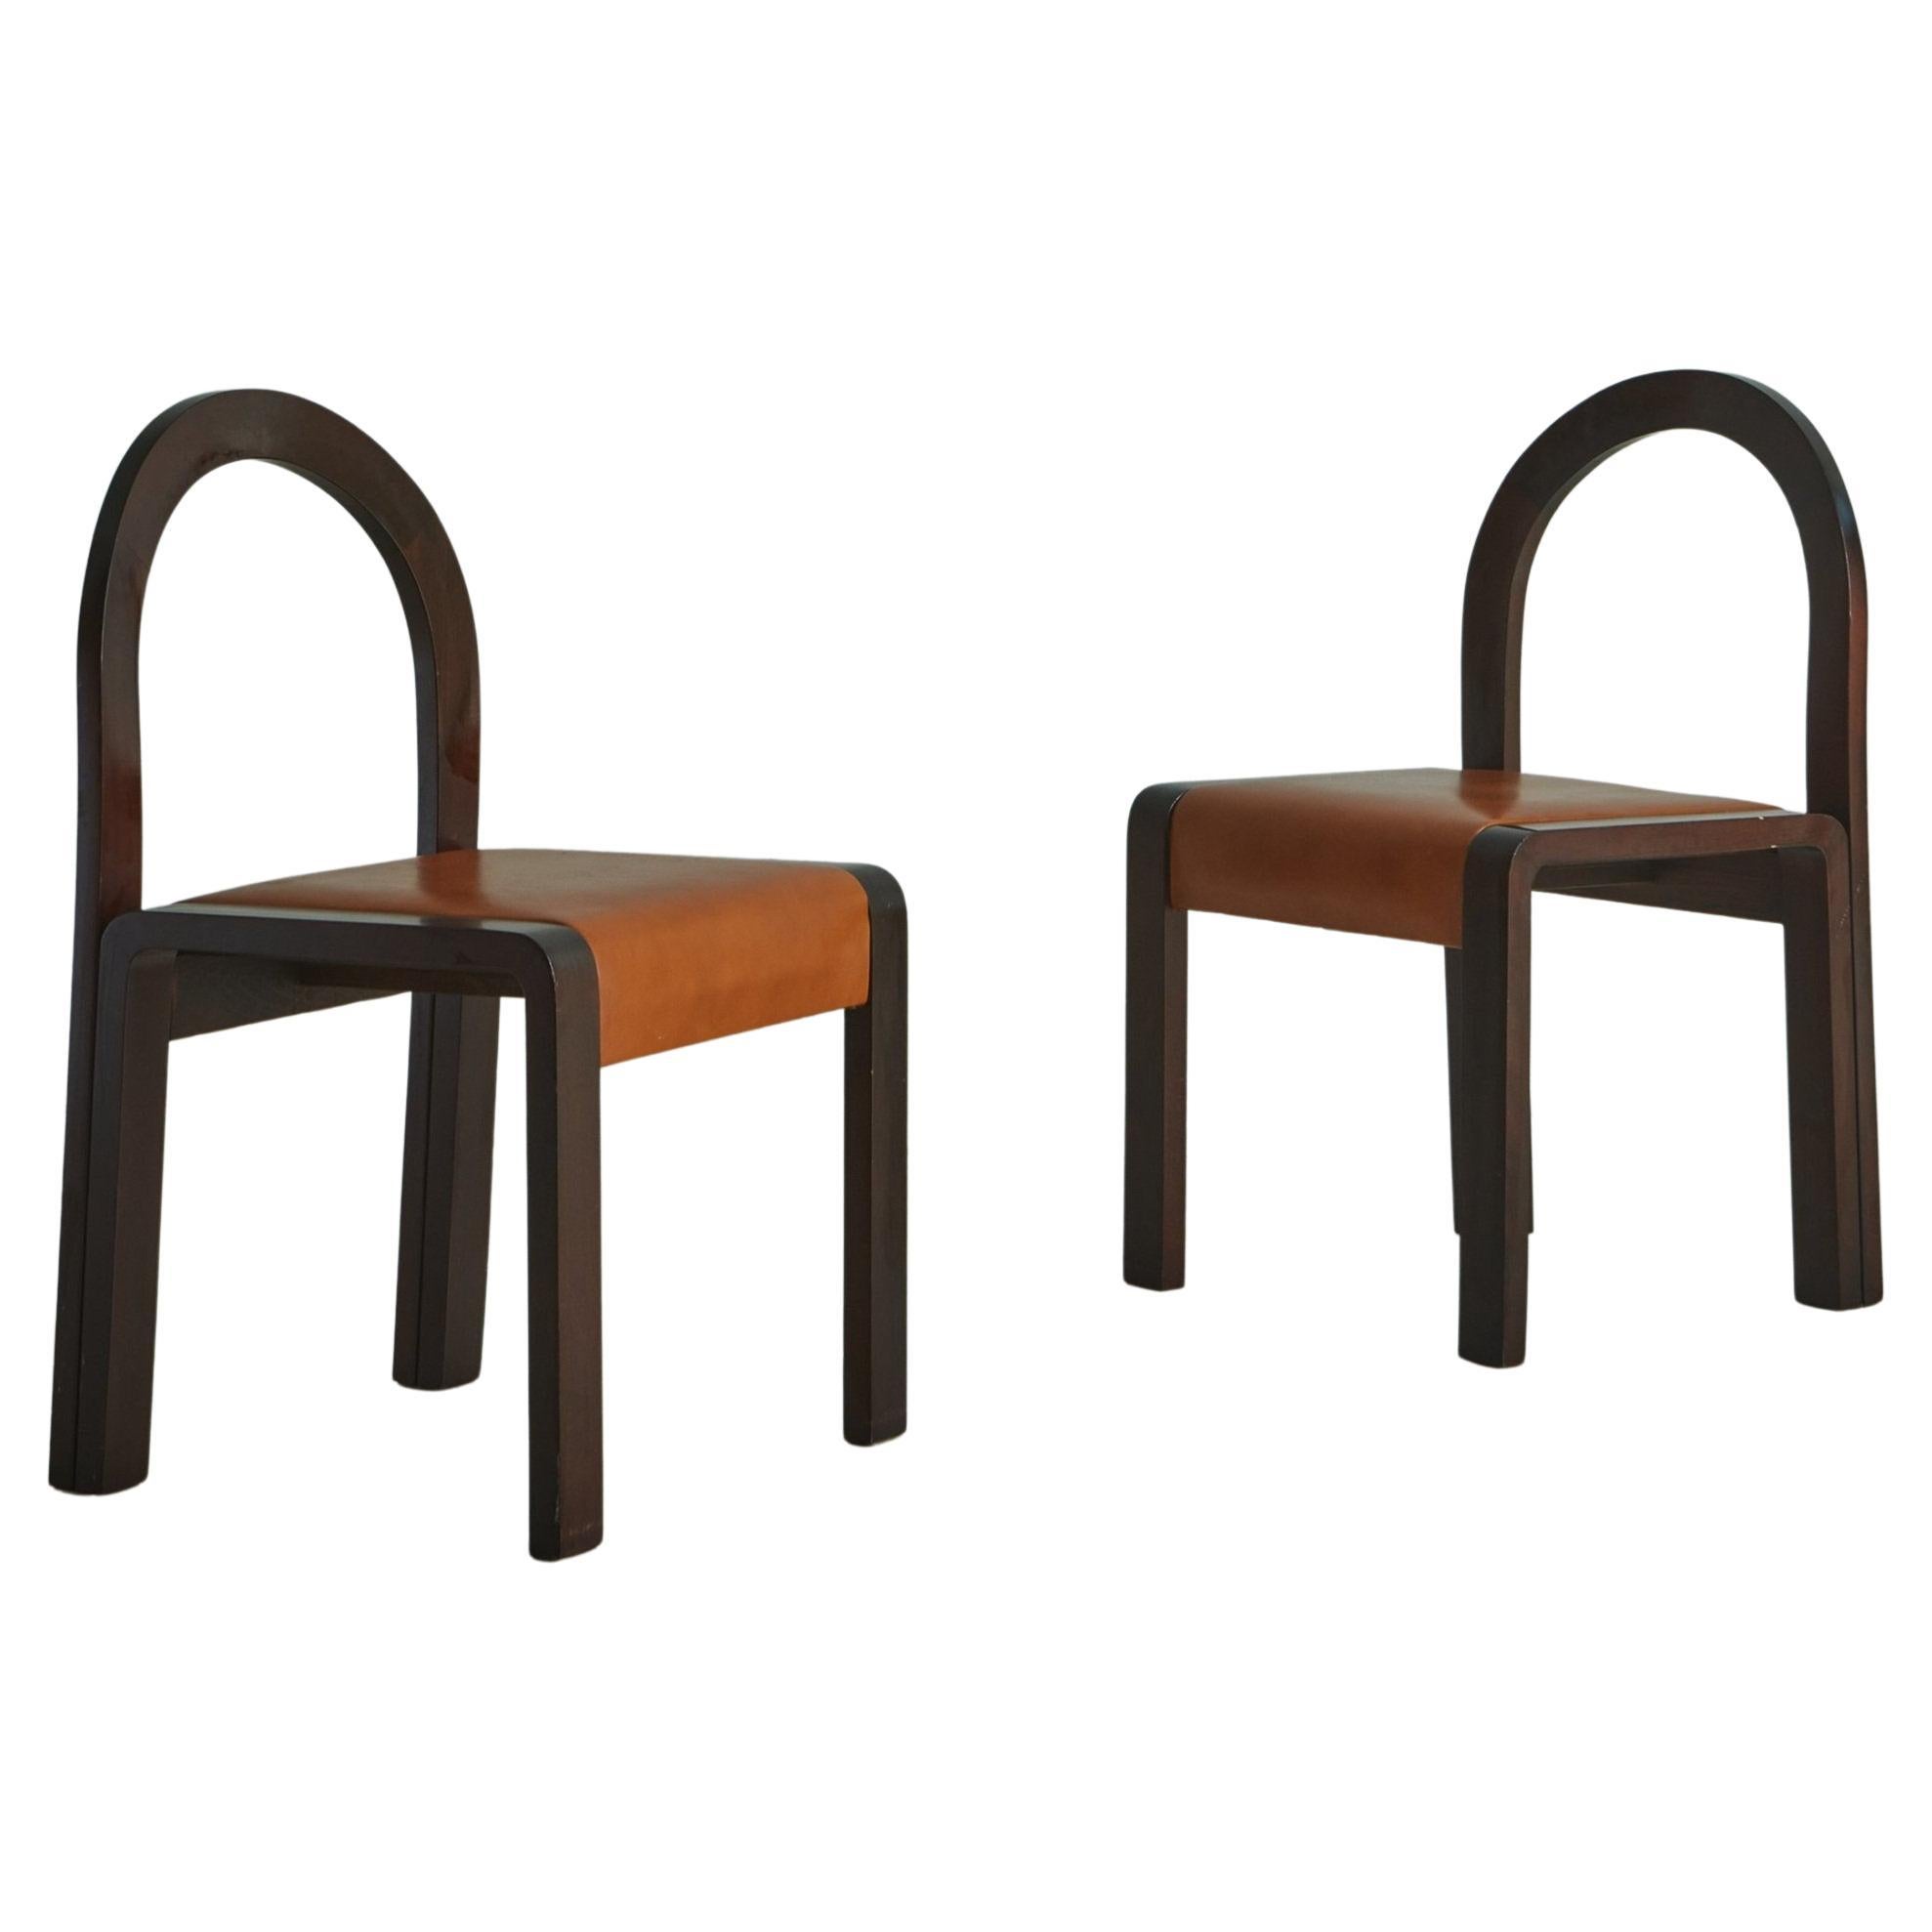 Set of 4 Bentwood Dining Chairs with Cognac Leather Seats, Italy 1980s For Sale